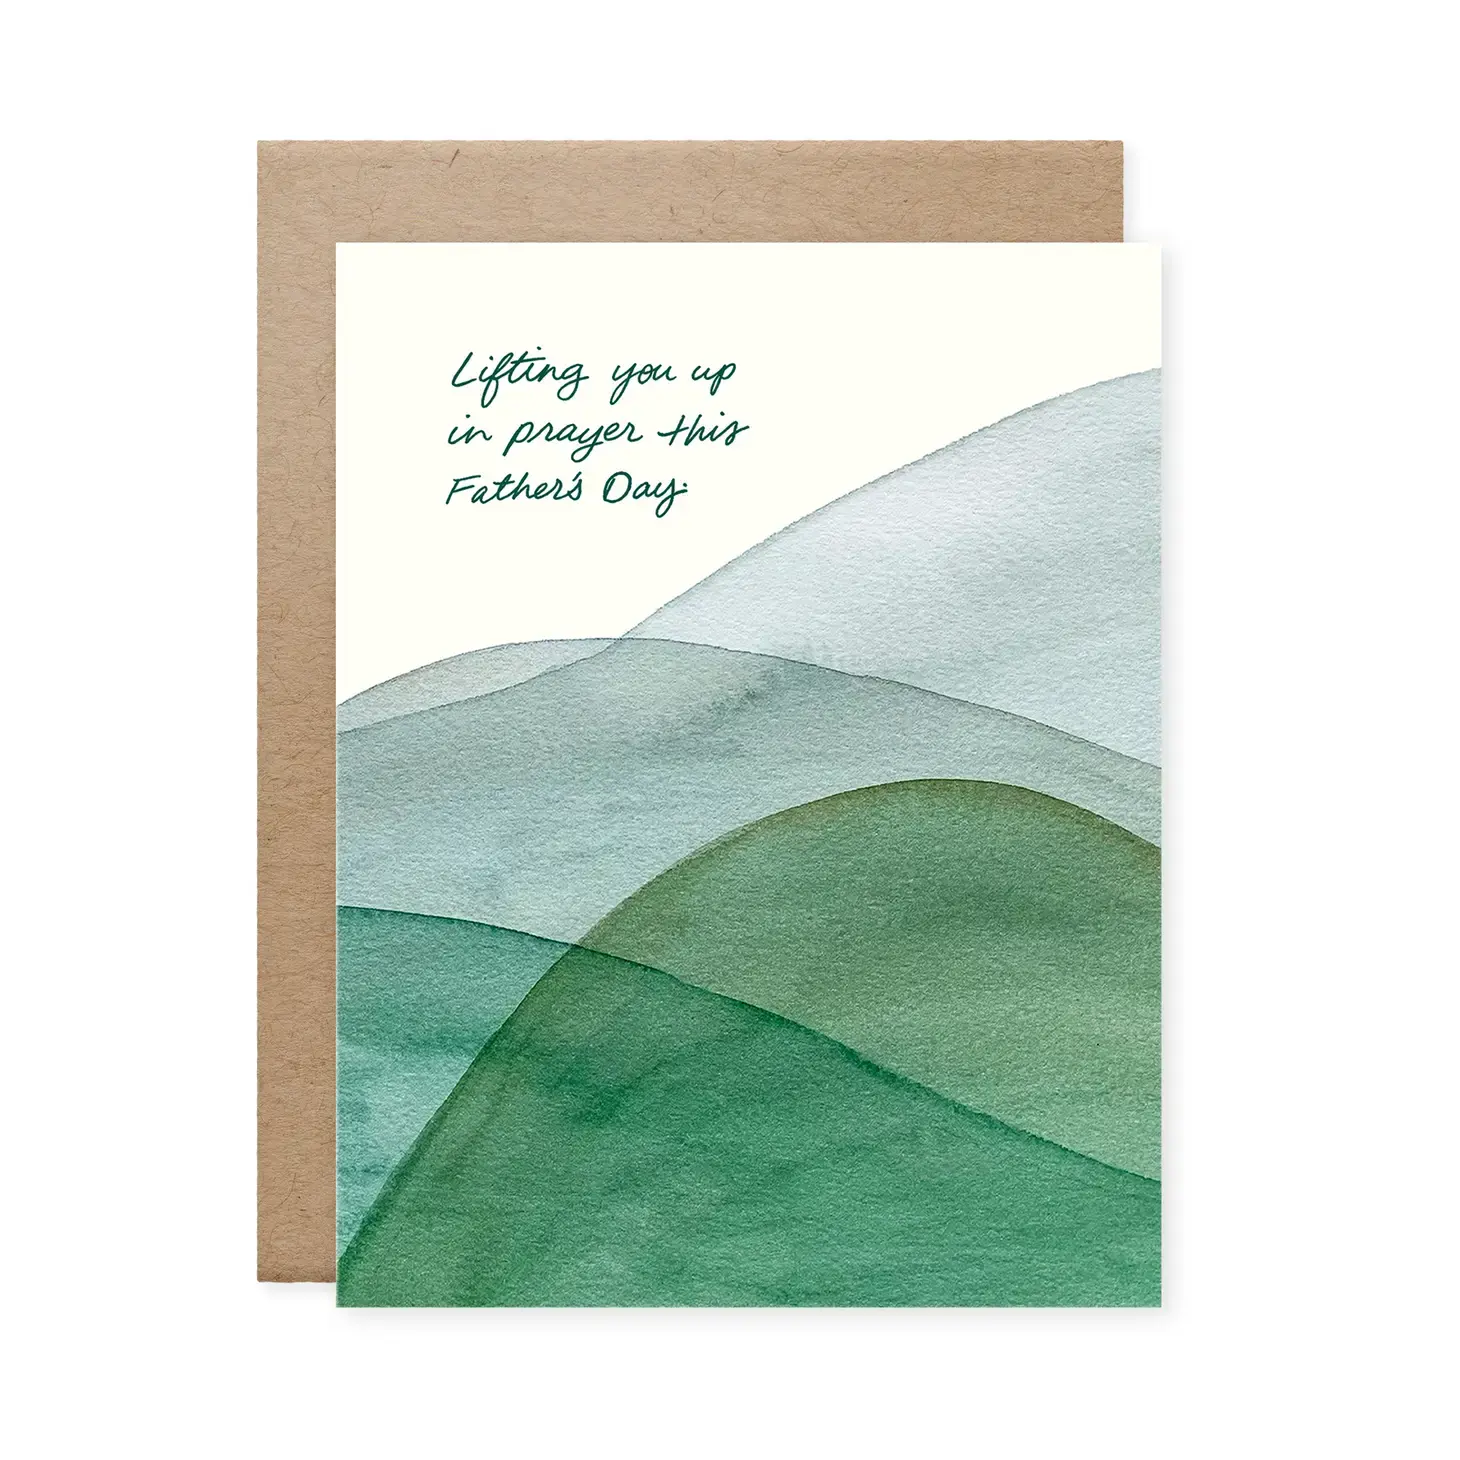 Lifting You Up in Prayer This Father's Day Card